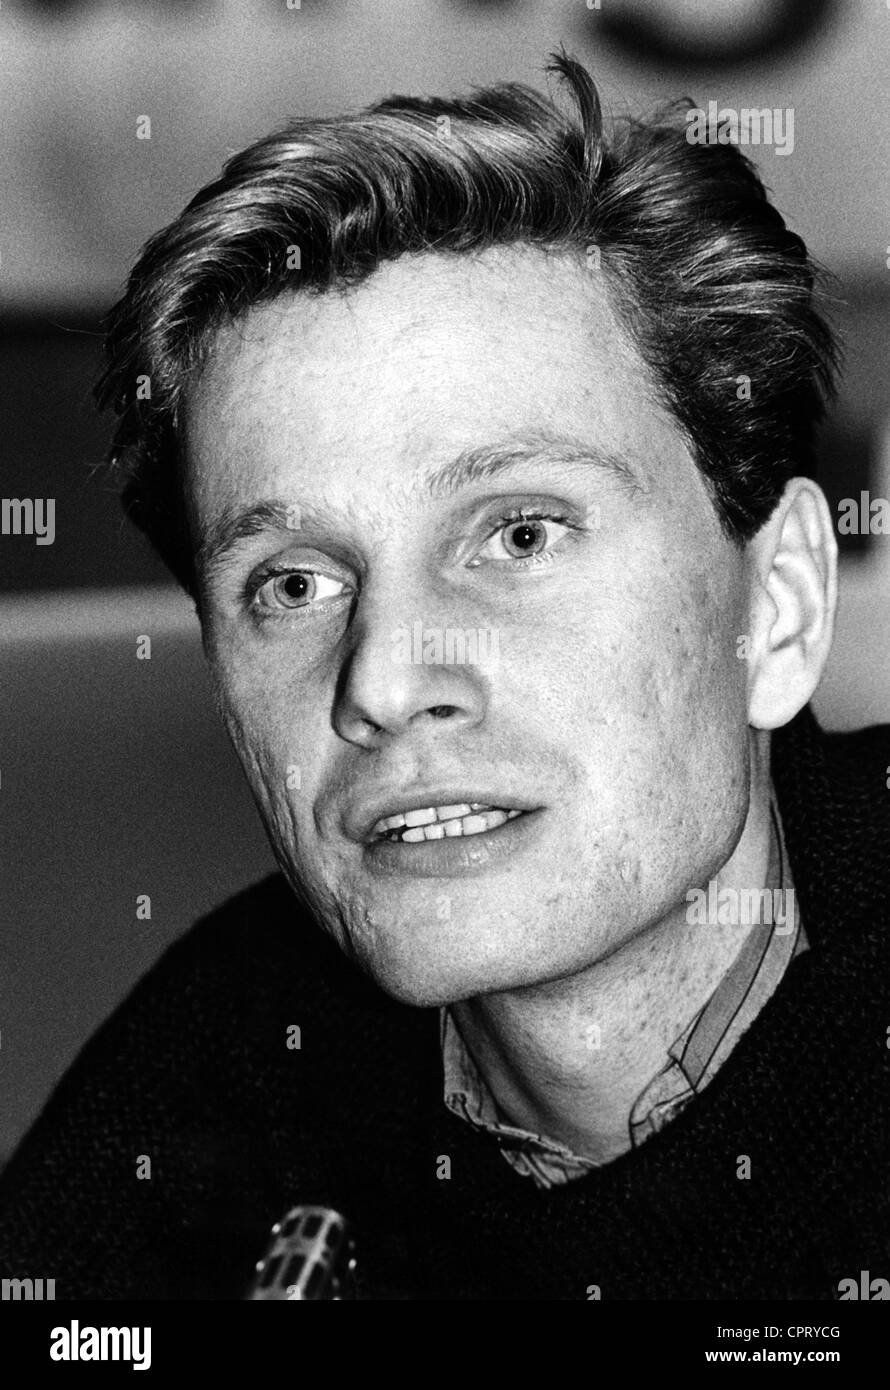 Westerwelle, Guido, 27.12.1961 - 18.3.2016, German politician (Free Democratic Party, FDP), portrait, as Chairman of the Young Liberals, at the federal congress of the Young Liberals, Freiburg, Germany, 6.- 8.12.1985, Stock Photo